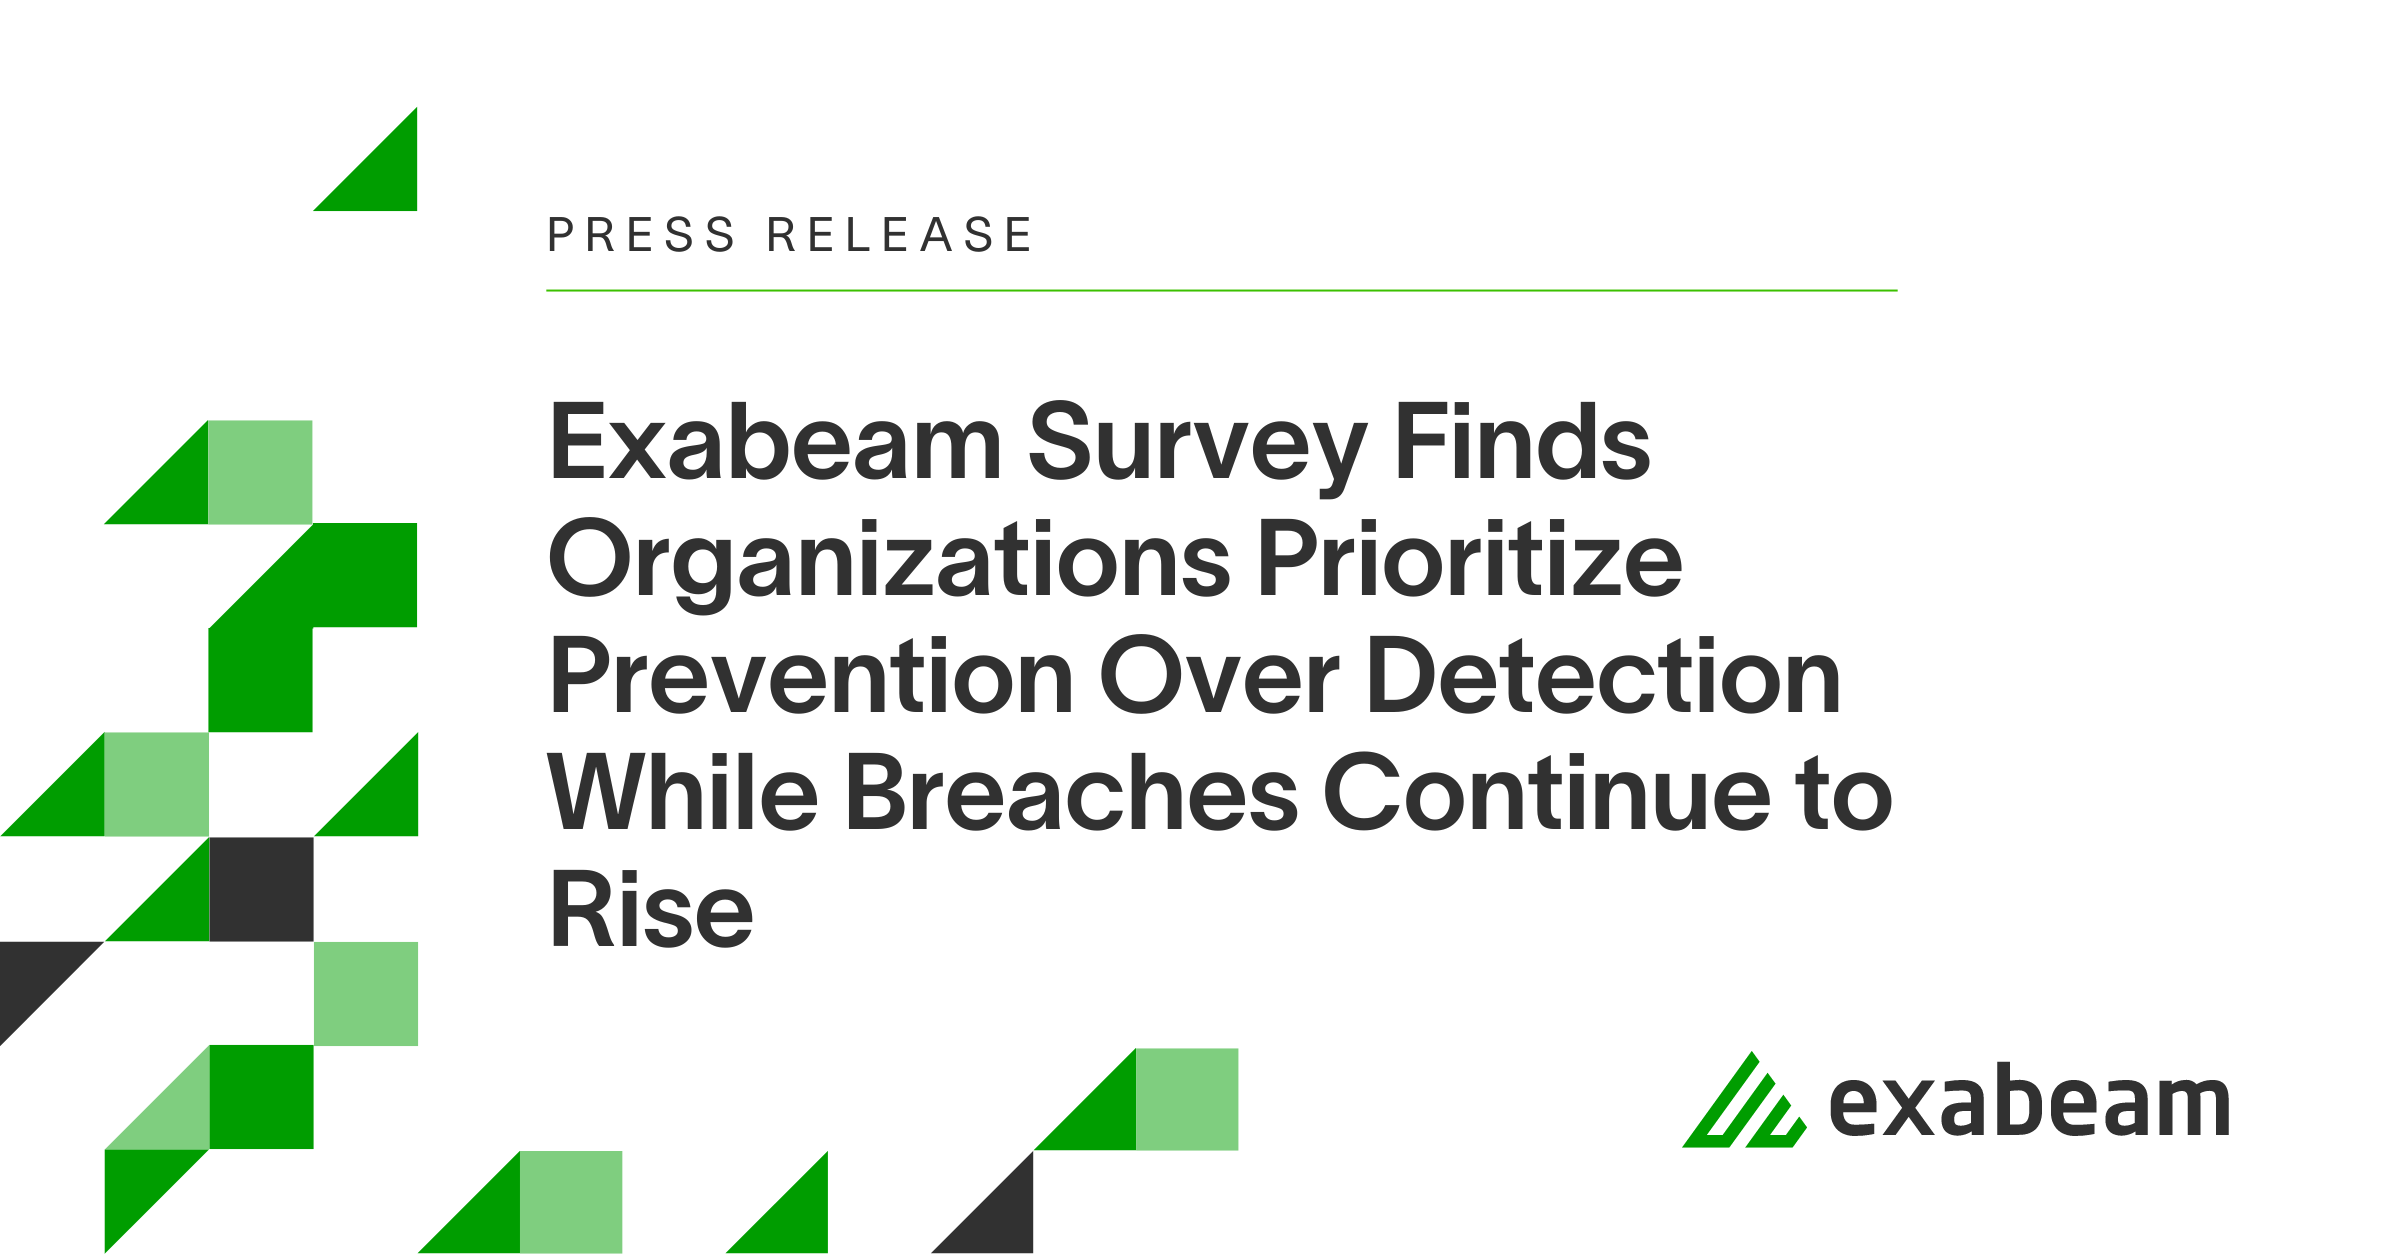 Exabeam Survey Finds Organizations Prioritize Prevention Over Detection While Breaches Continue to Rise